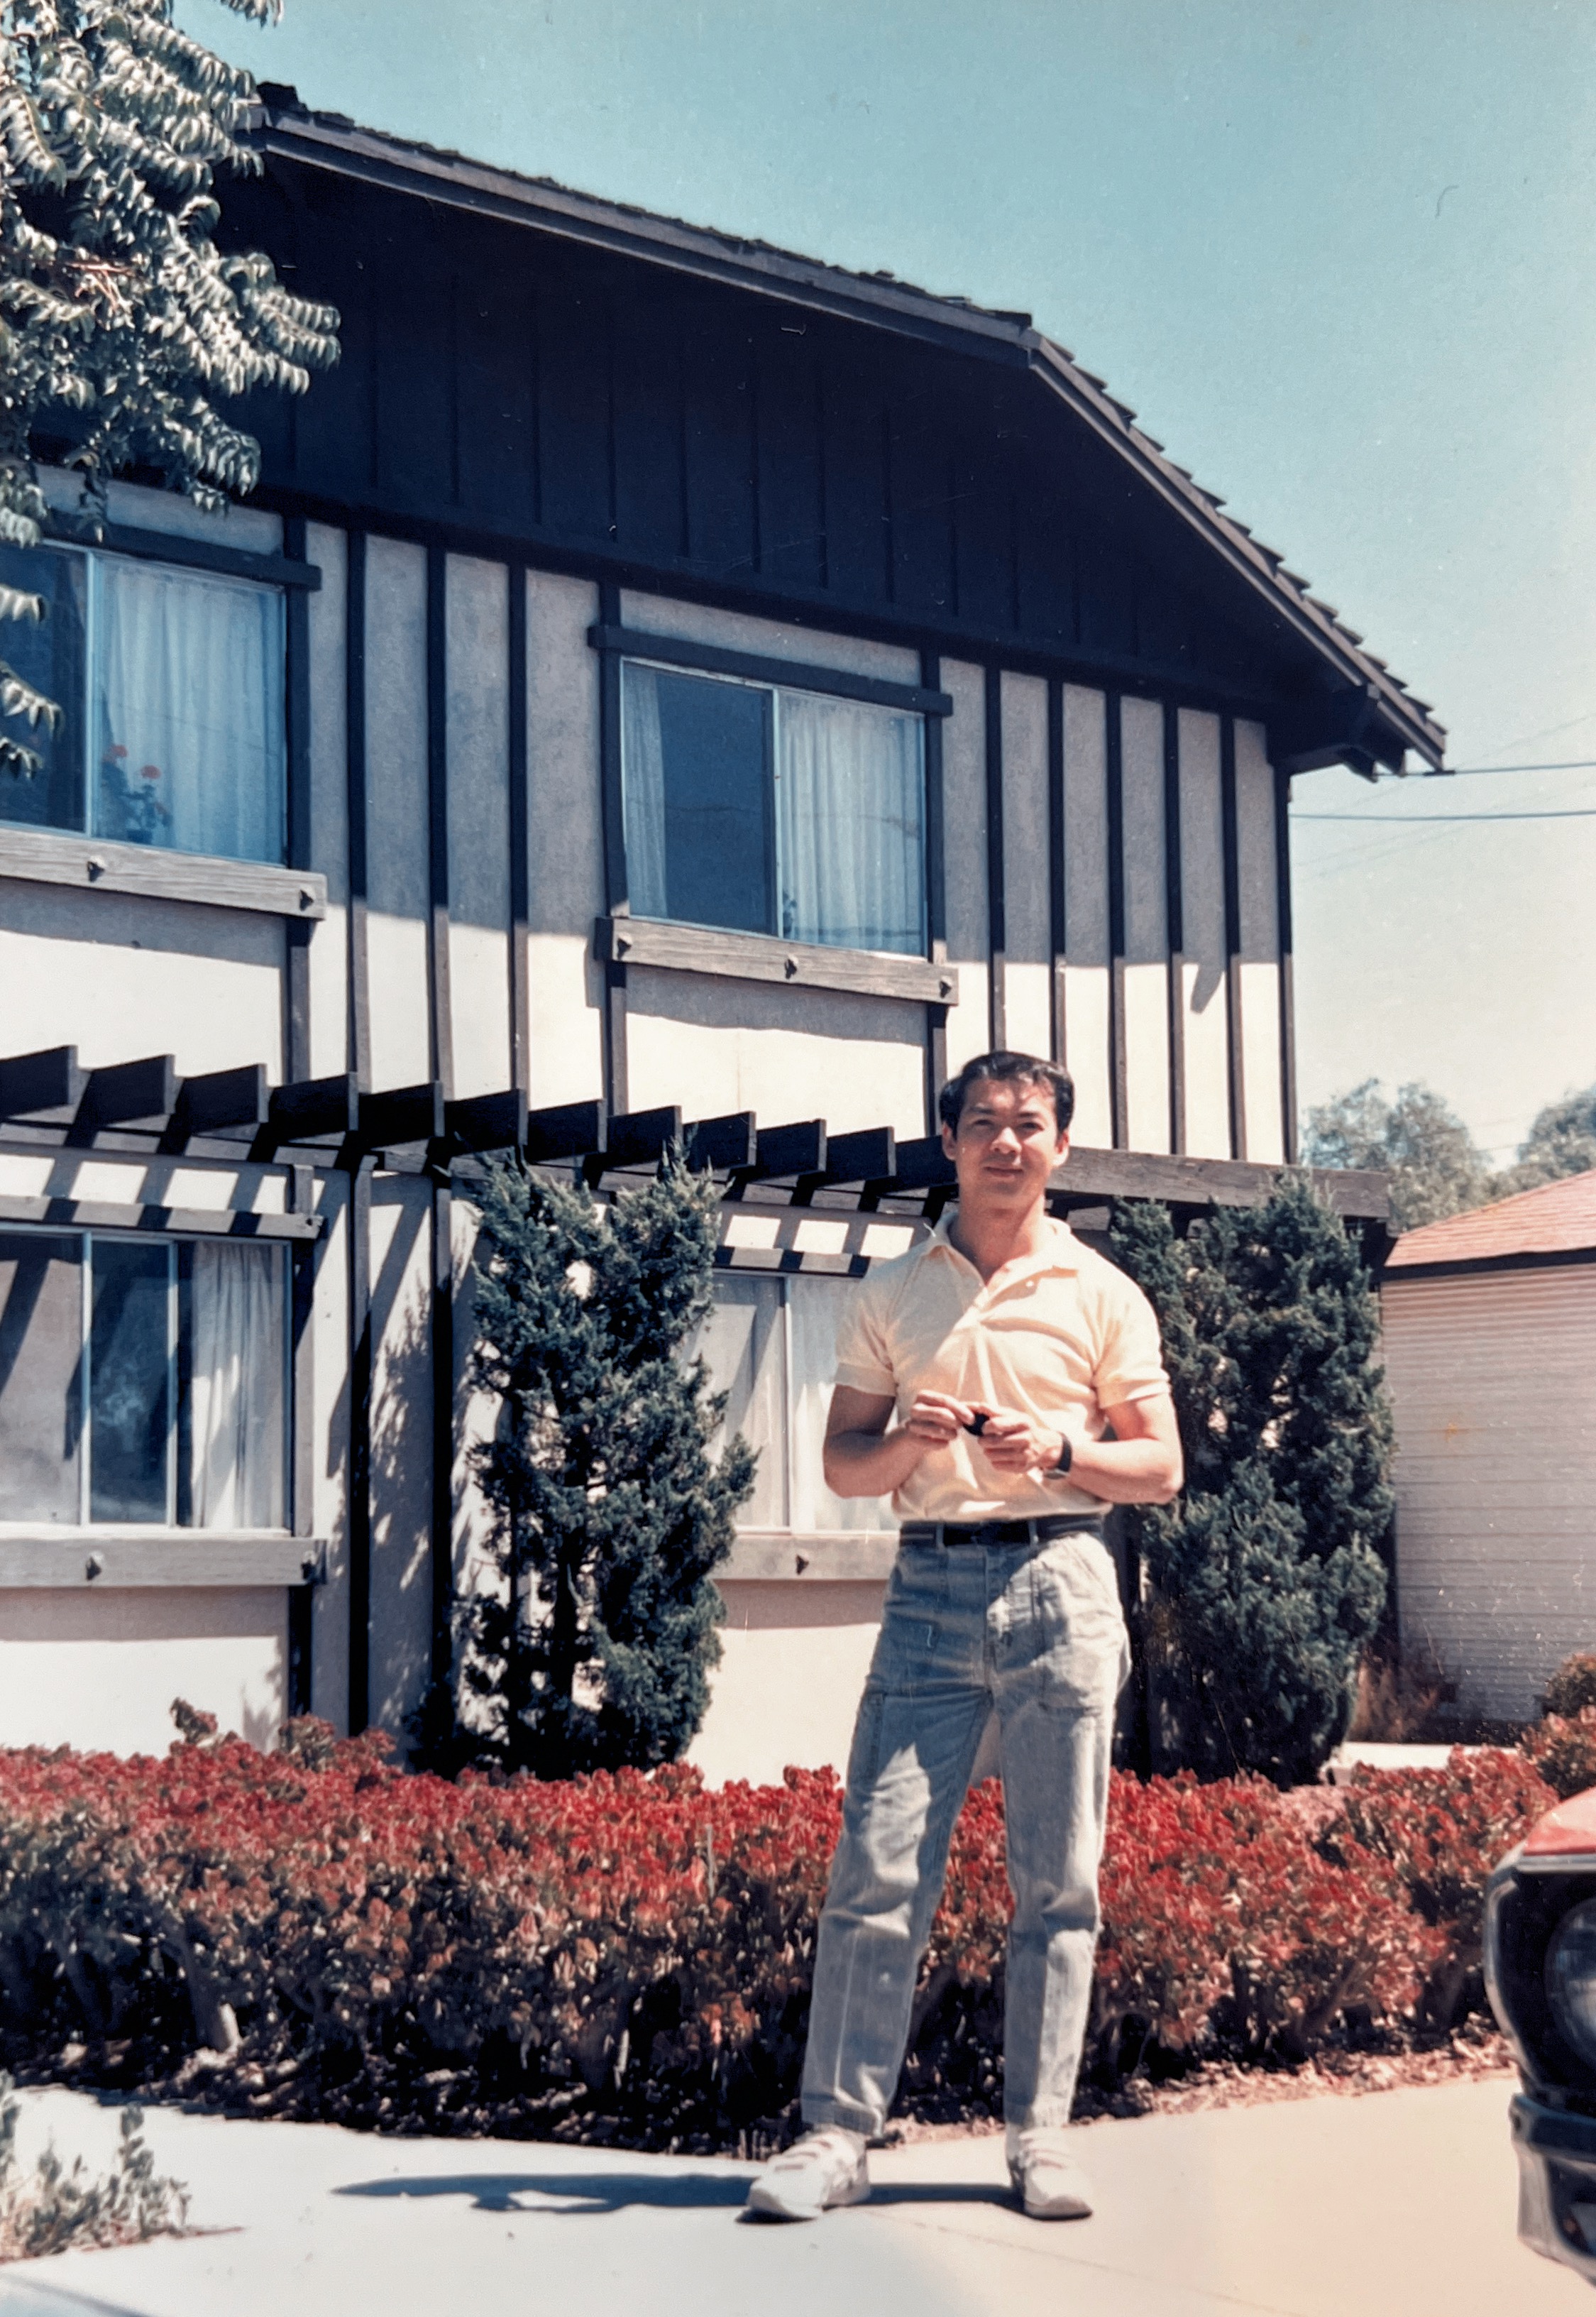 Photo taken in front of my apartment in Campbel, California in August 1985.